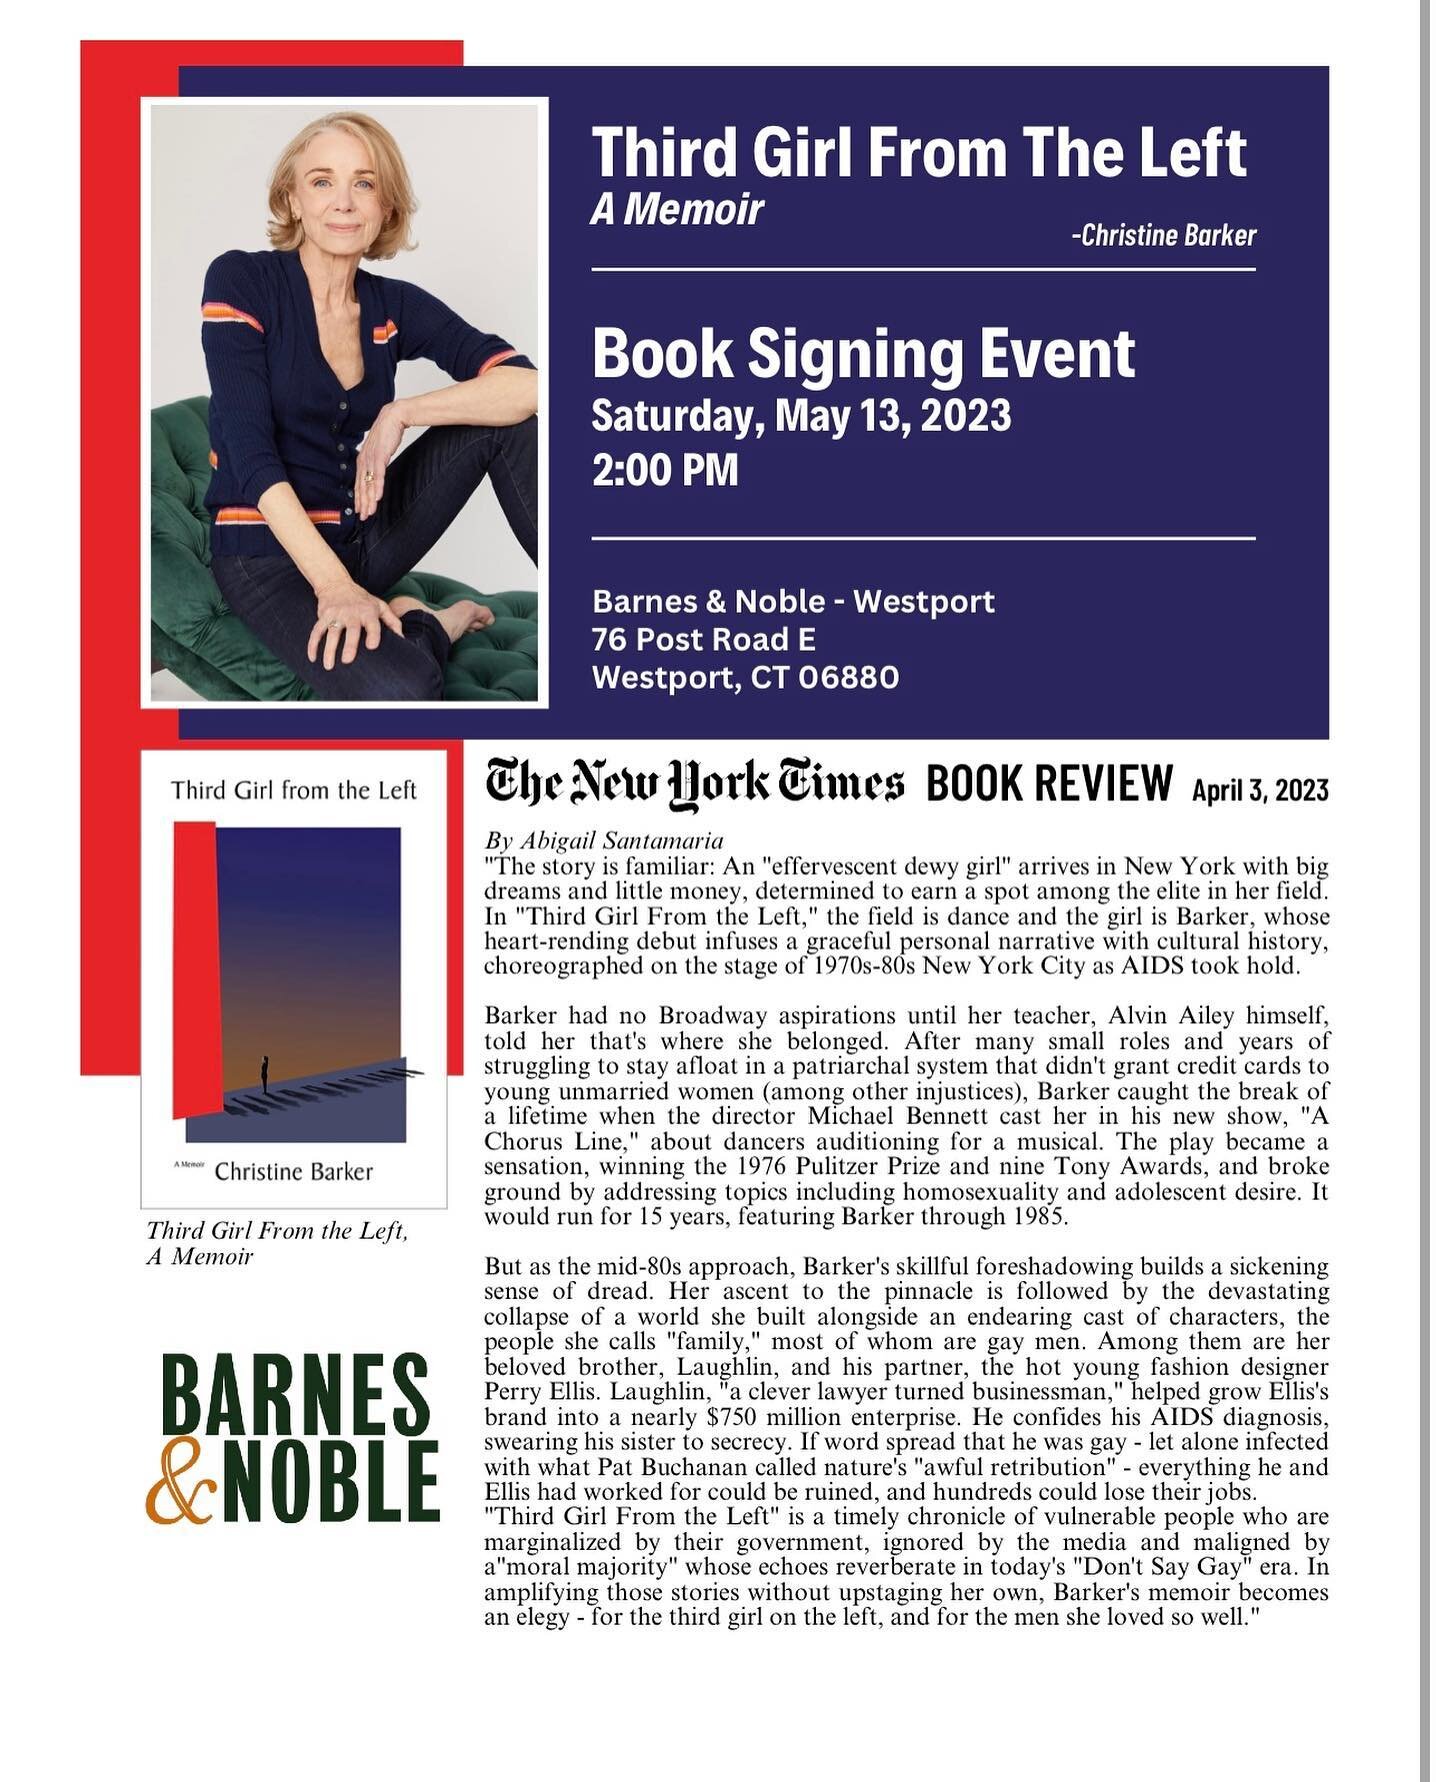 Please join me at the Westport Barnes and Noble this Saturday May 13th at 2 PM! I look forward to signing books and meeting new people!📚